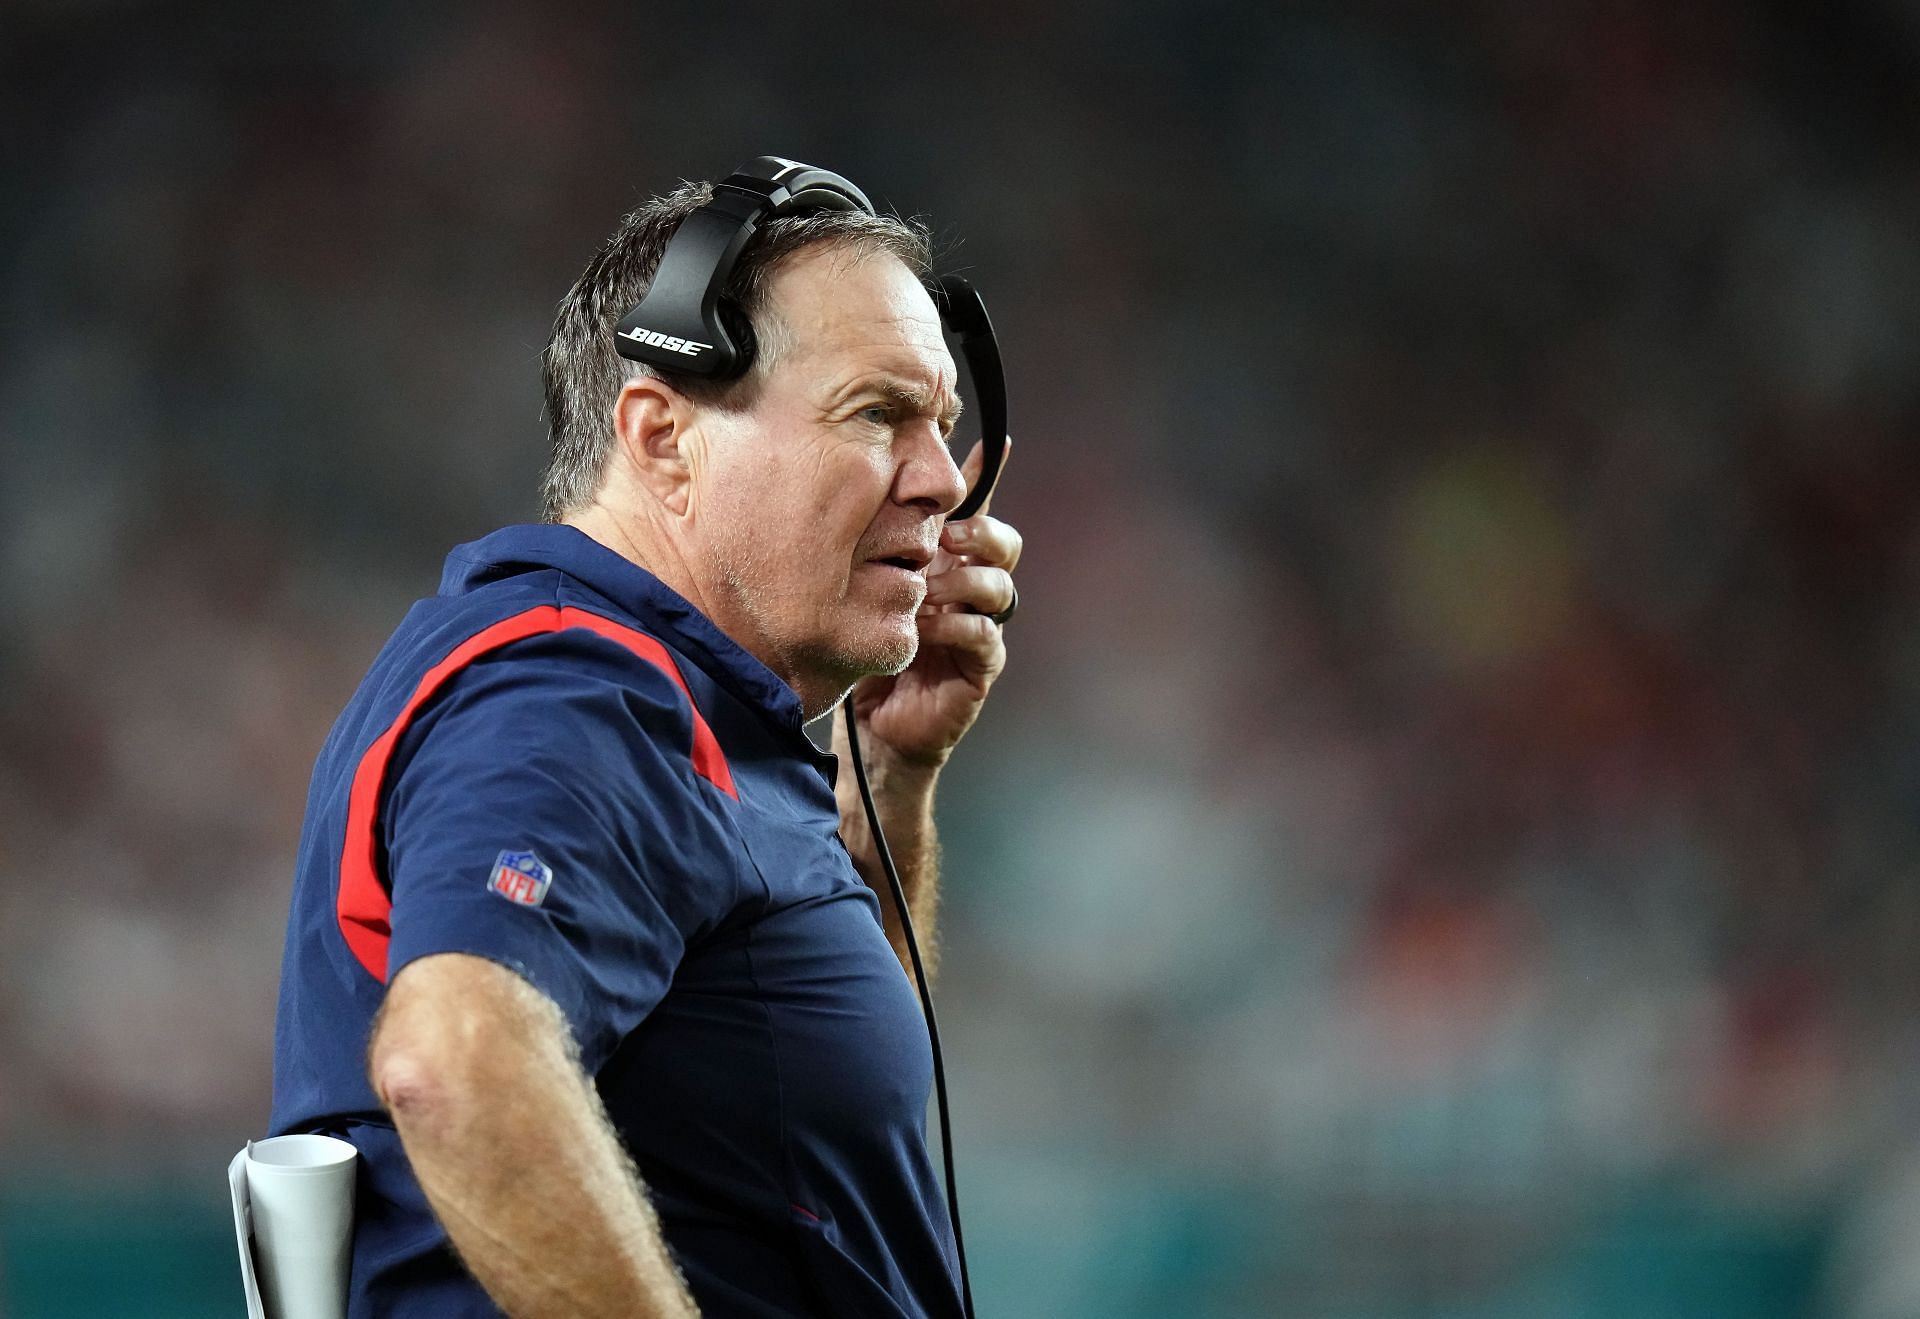 Bill Belichick could prove to be the greatest NFL coach ever